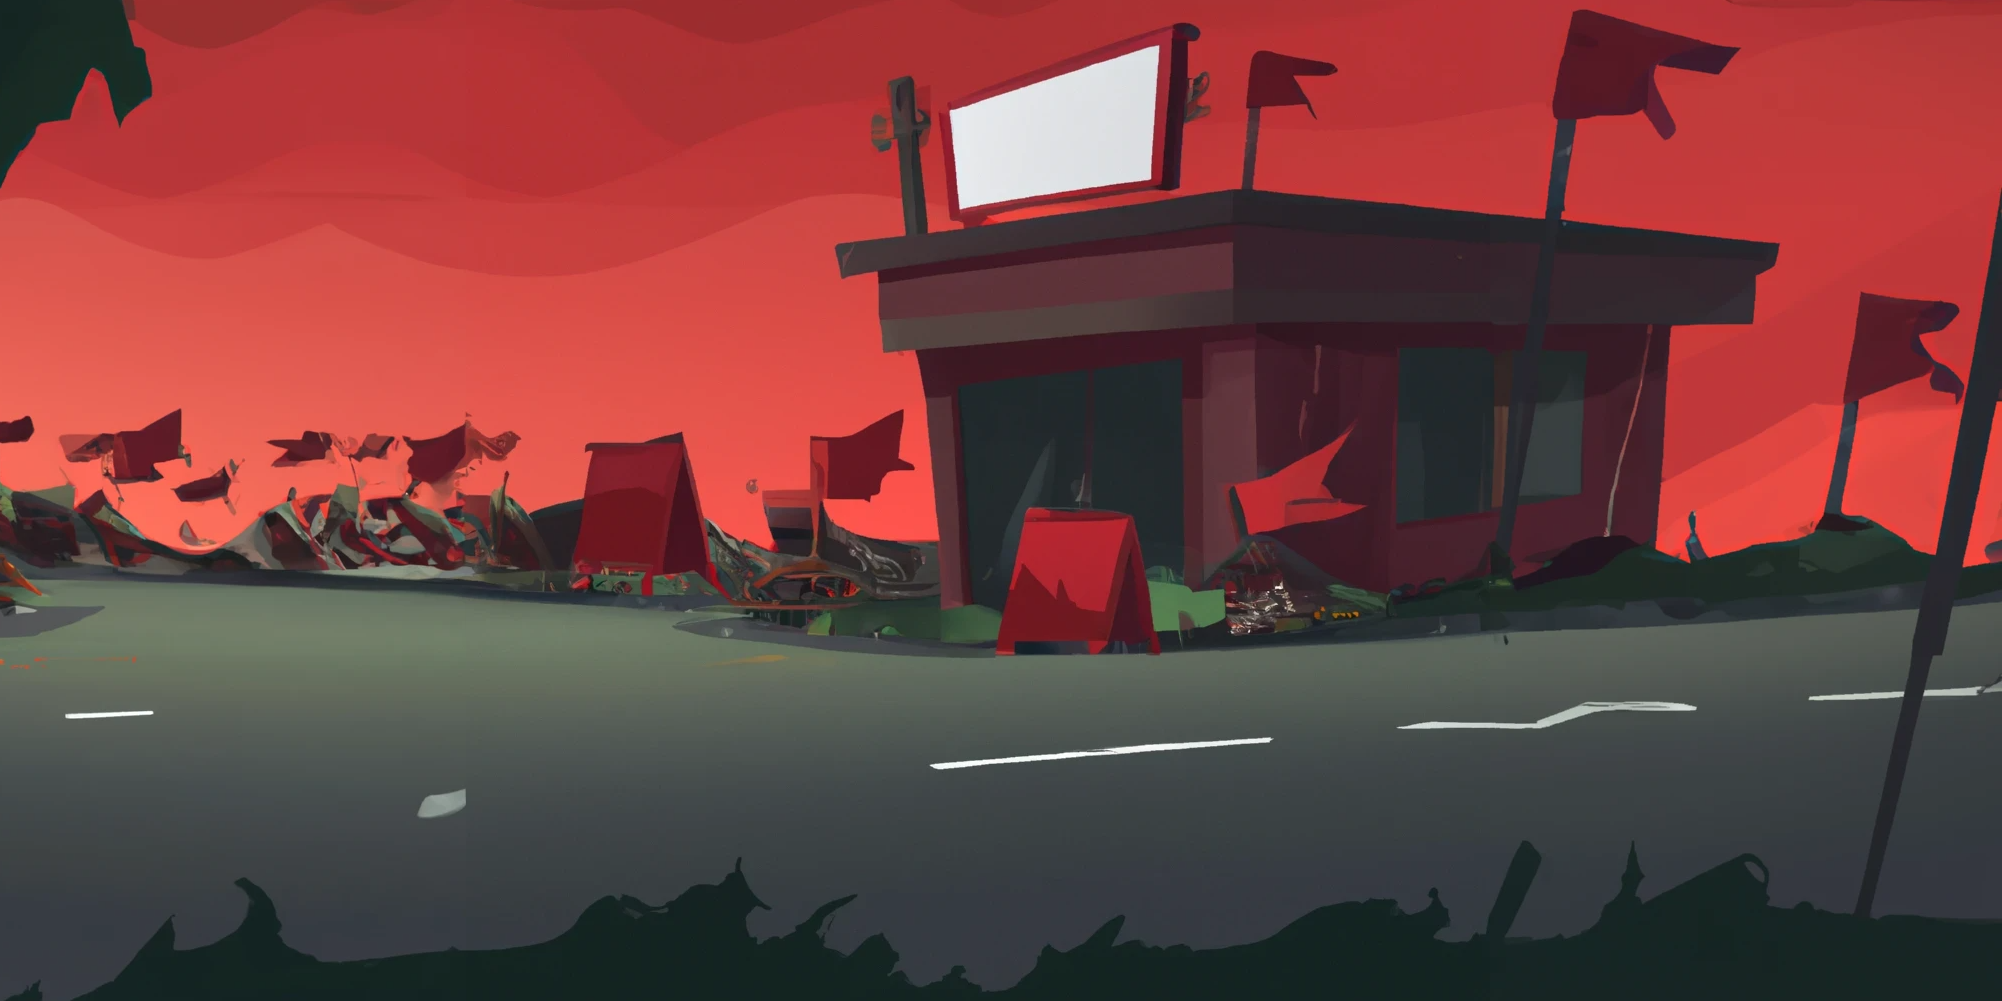 DALL·E generated image of a failed business by the side of the road covered in red flags, digital art